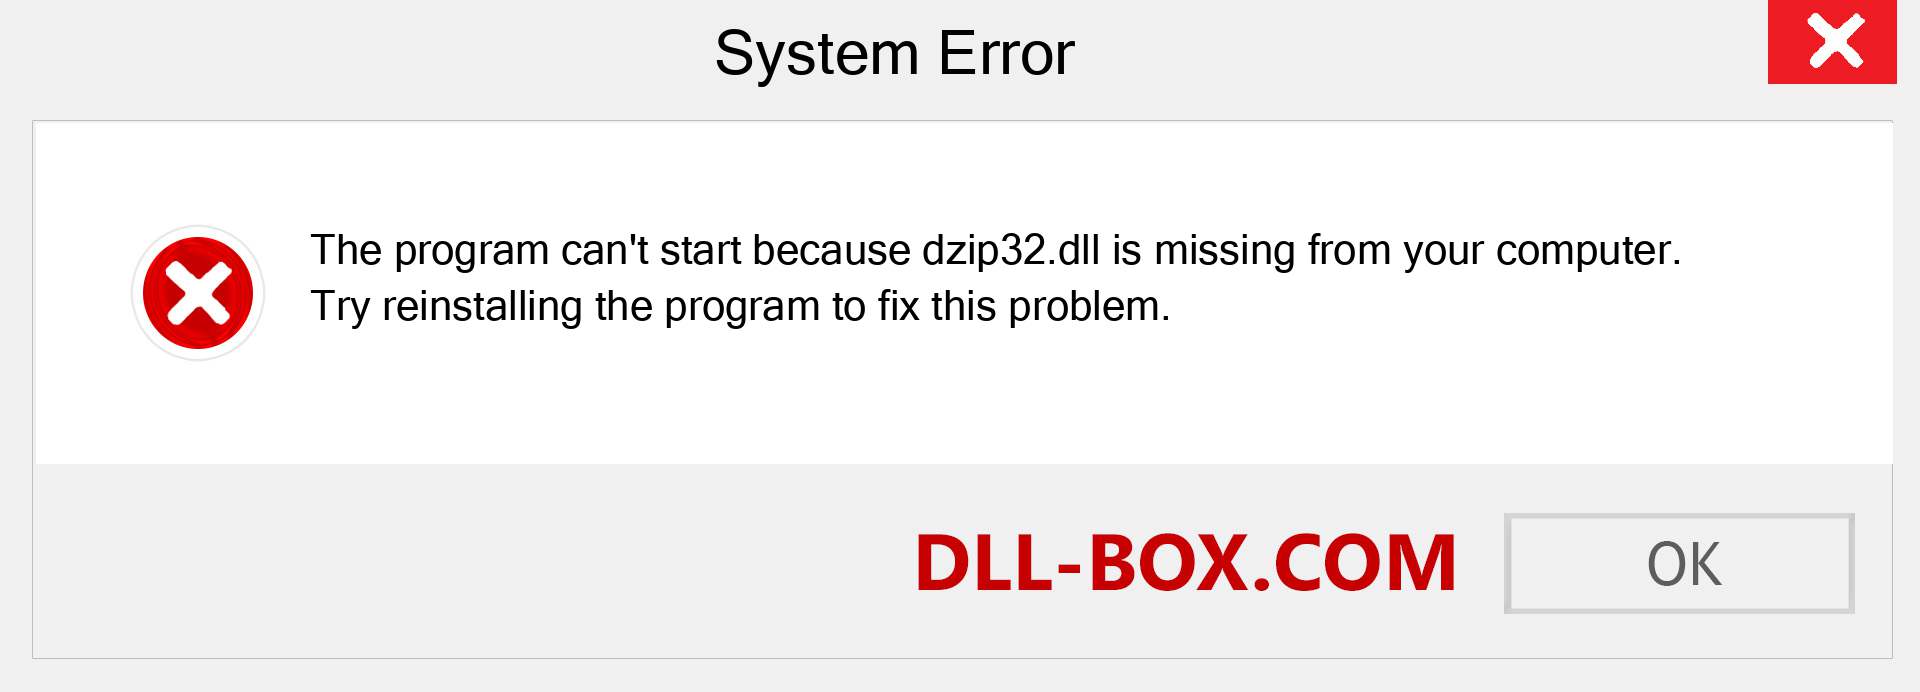  dzip32.dll file is missing?. Download for Windows 7, 8, 10 - Fix  dzip32 dll Missing Error on Windows, photos, images